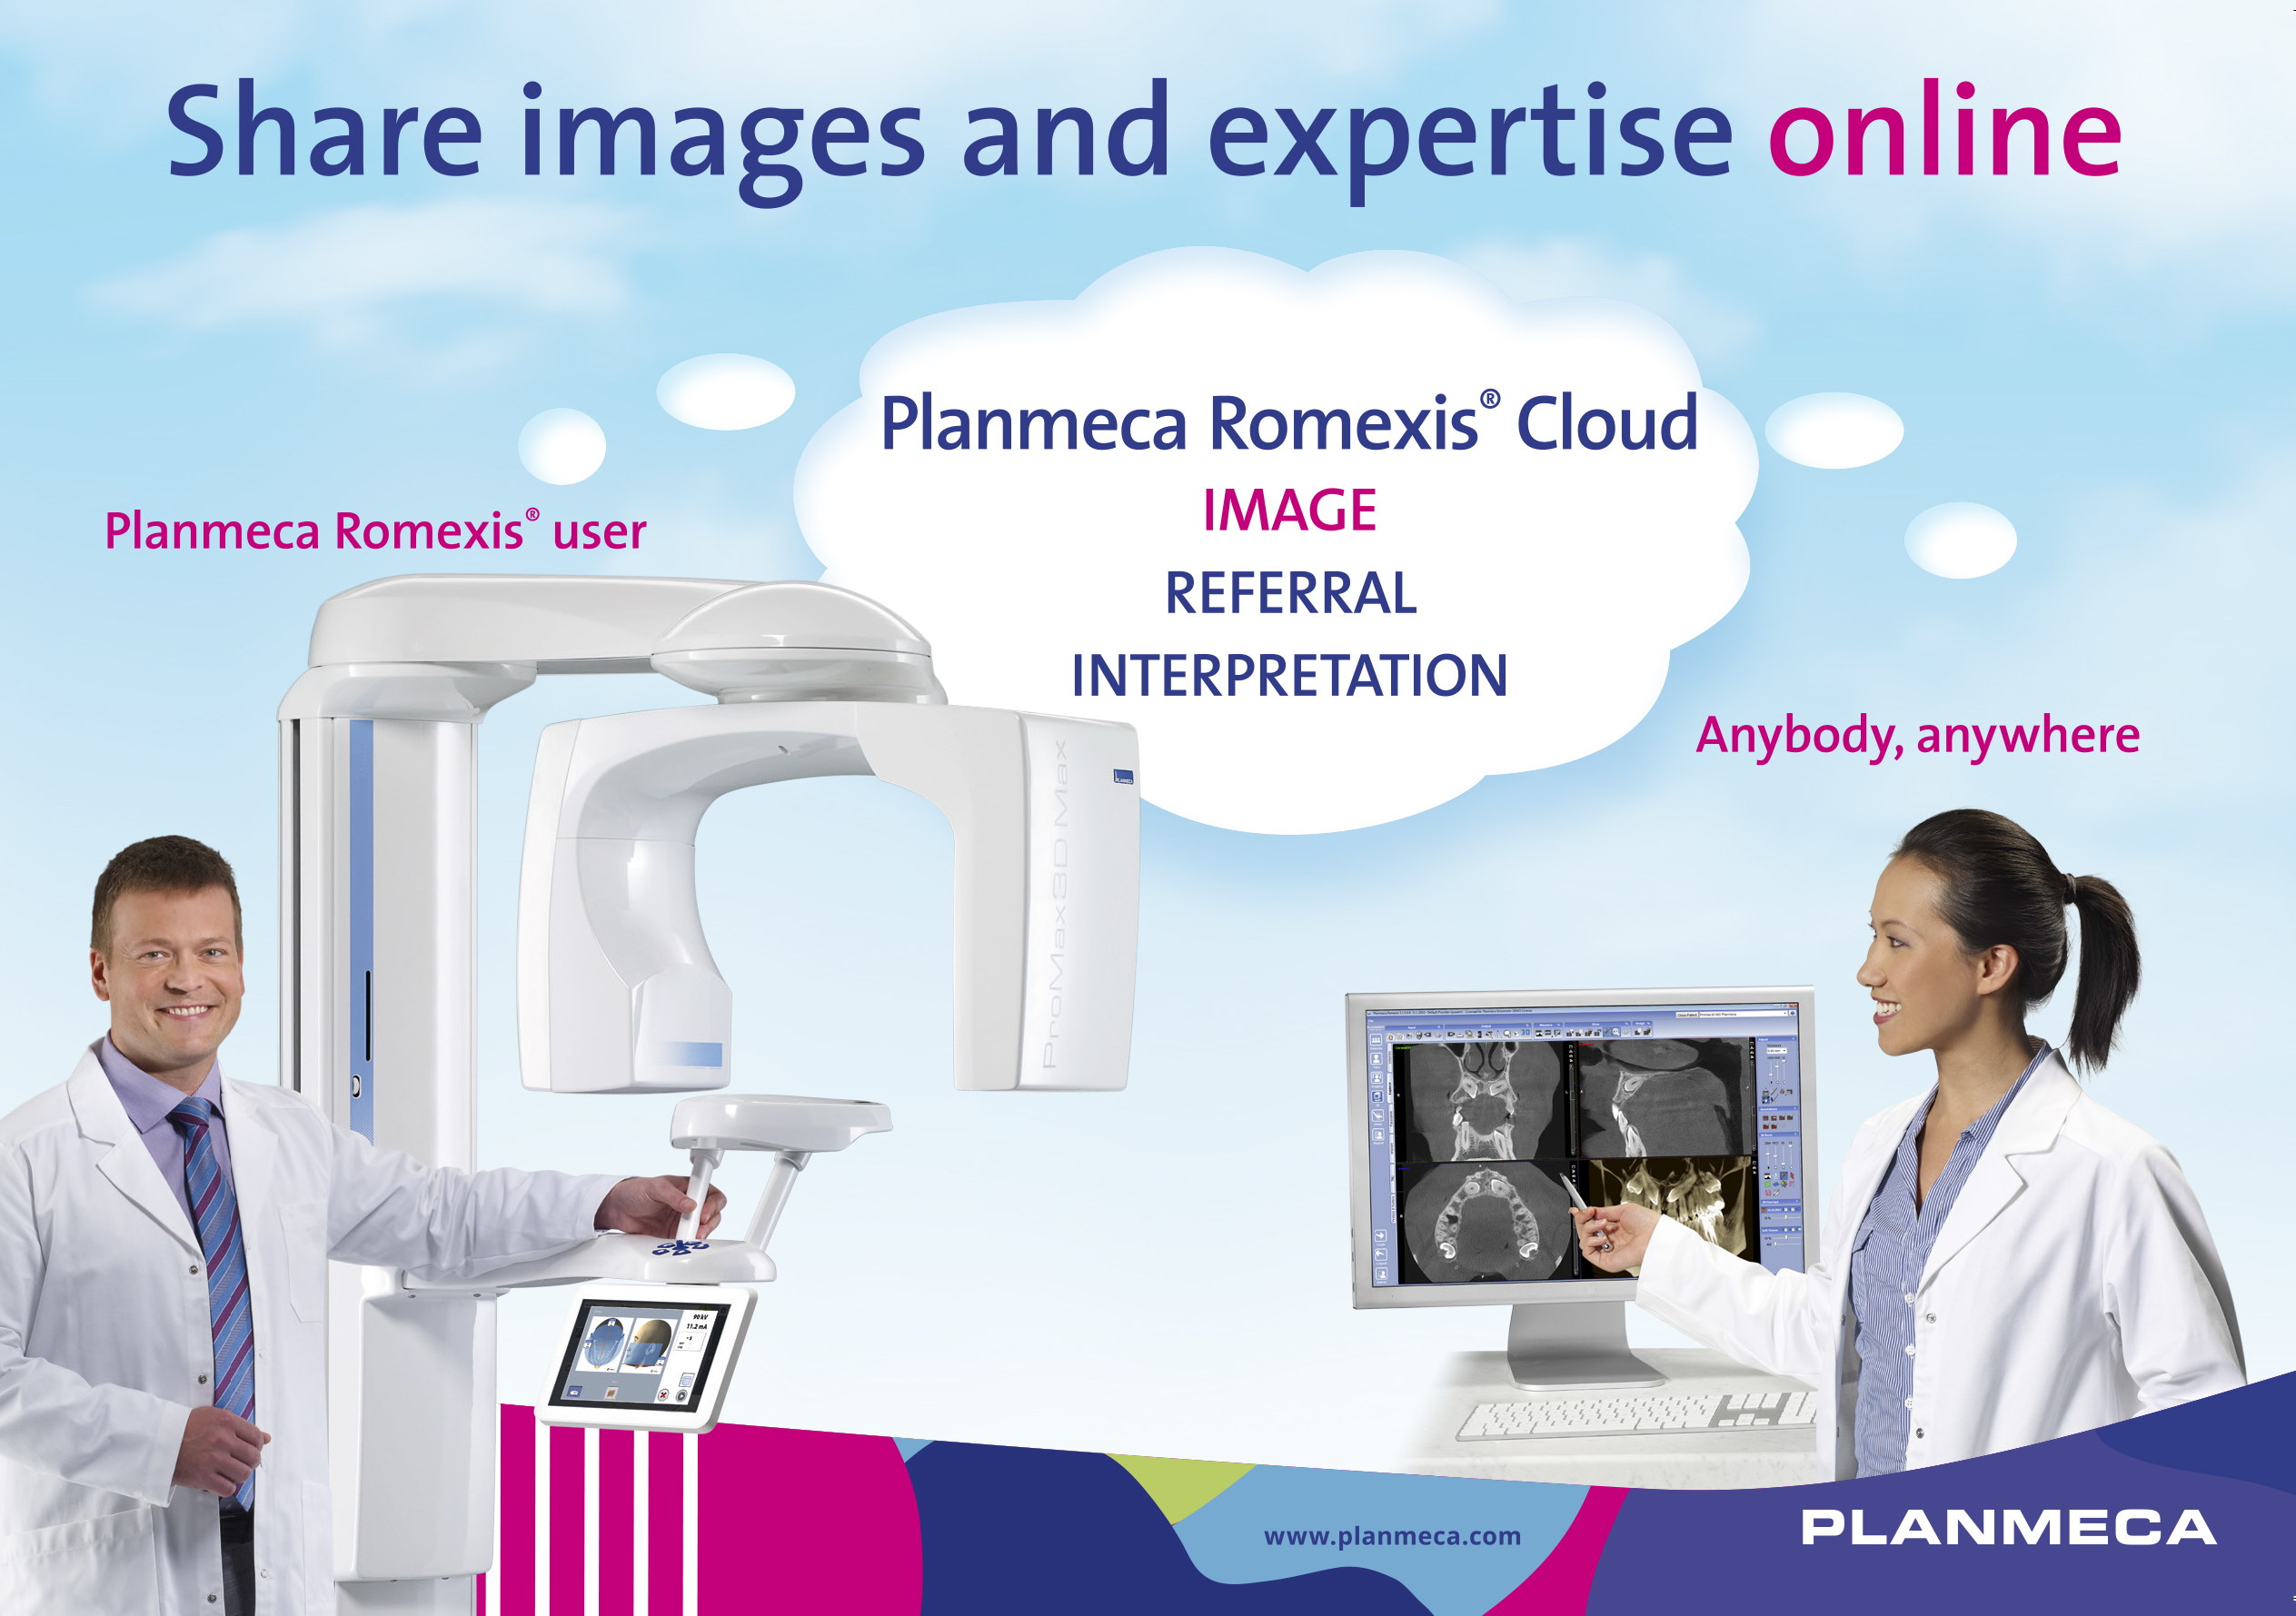 New Planmeca Romexis® Cloud service enables easy image transfer from professional to professional